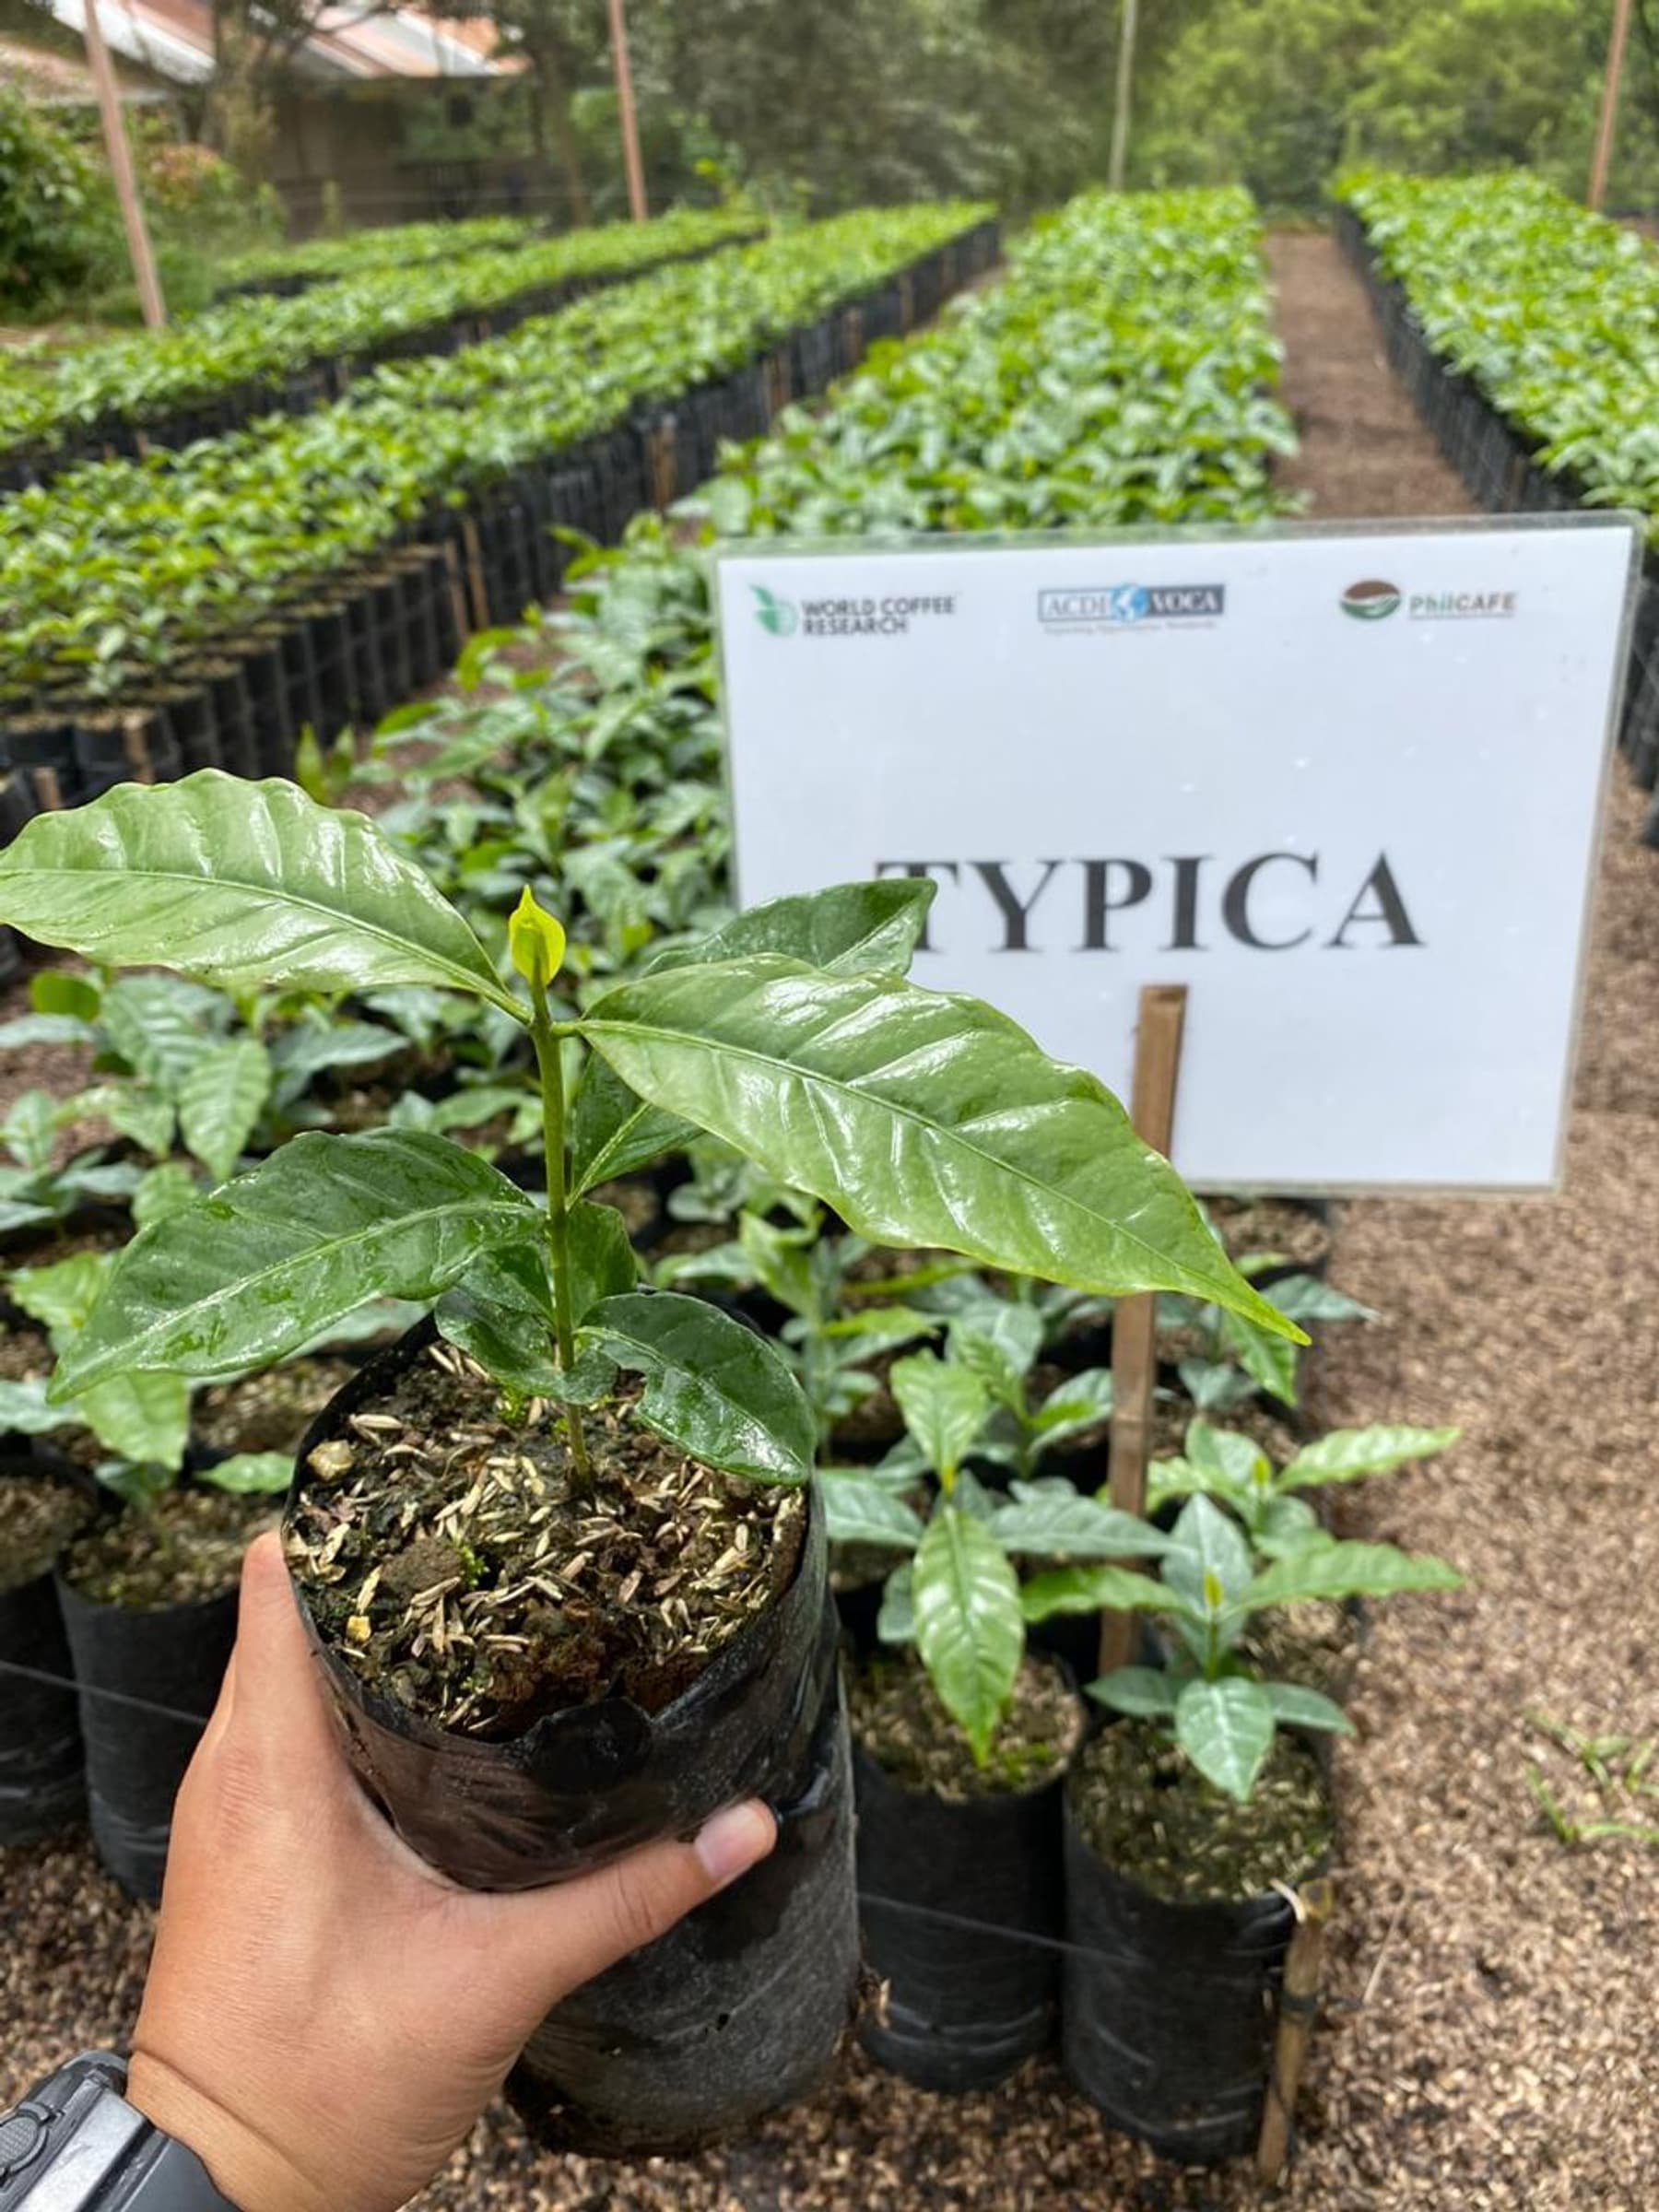 Philcafe typica